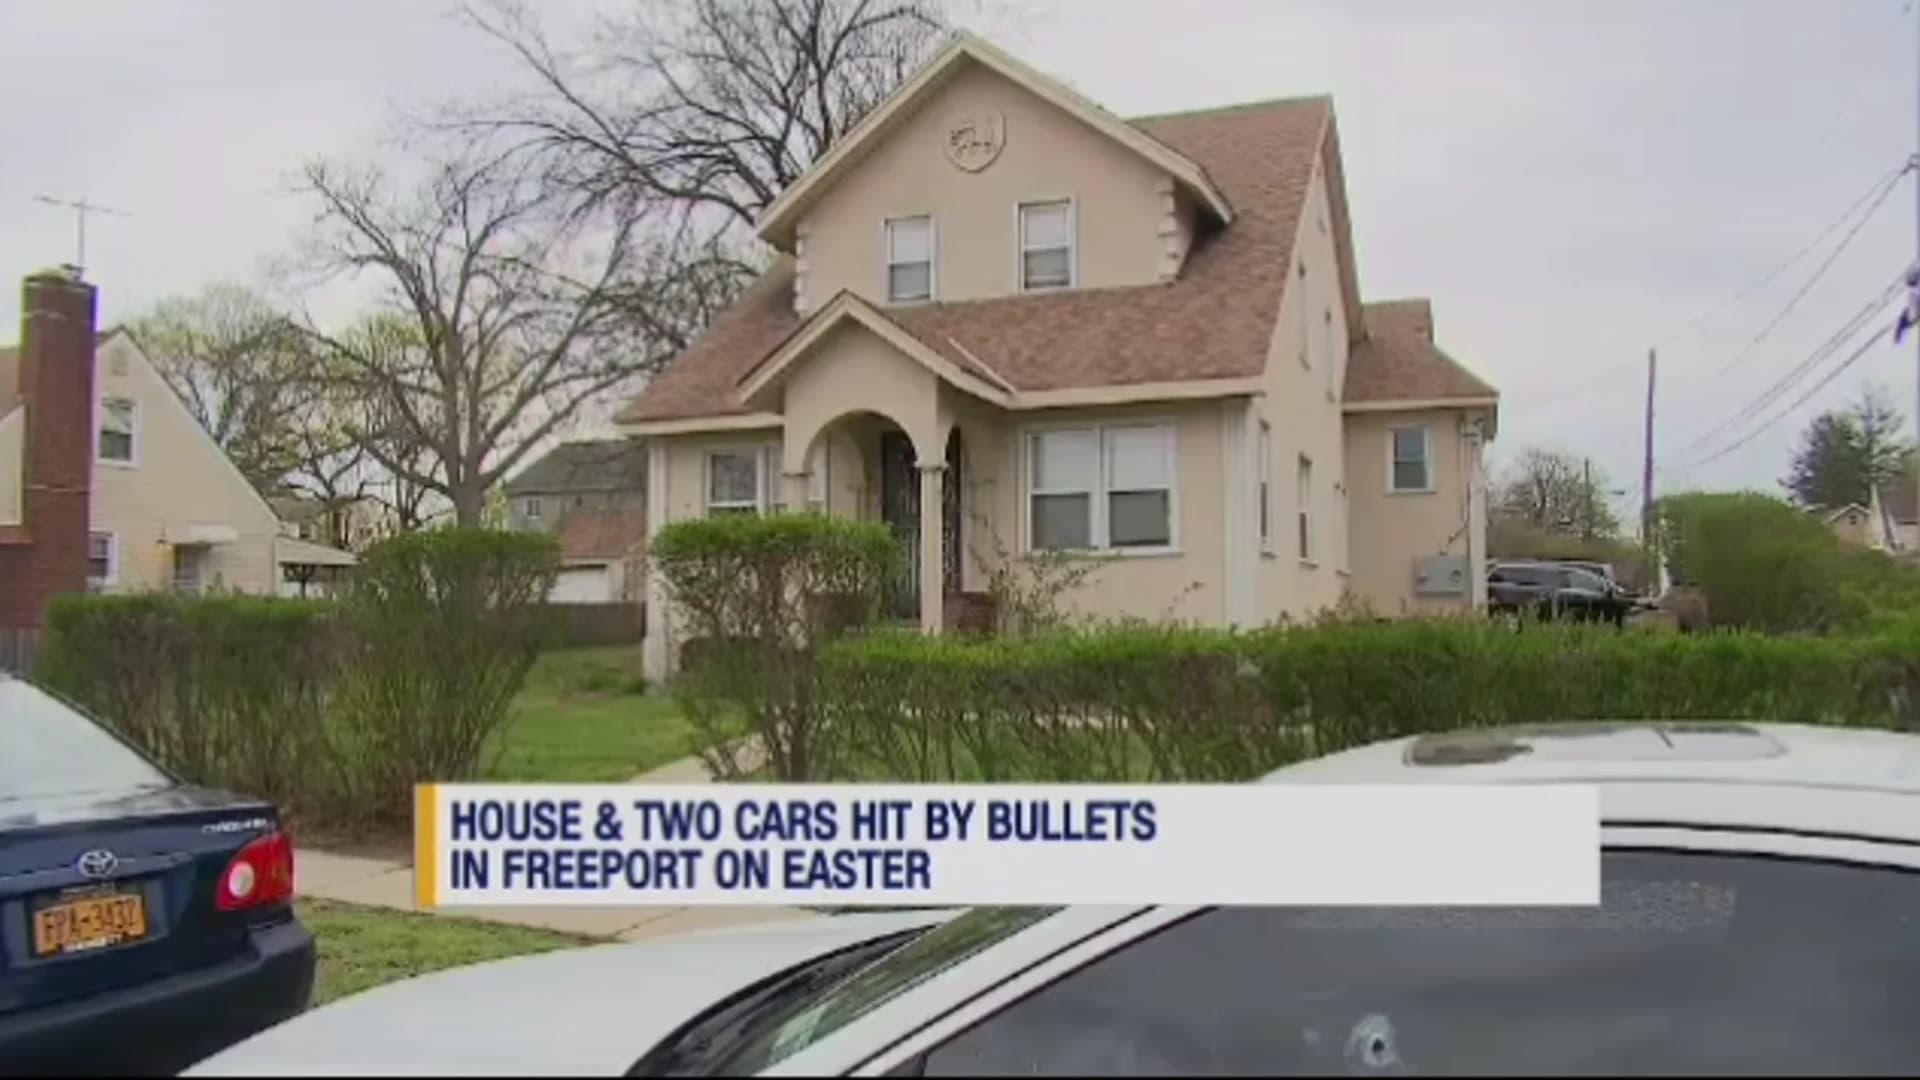 Officials: House, 2 cars struck by bullets in Freeport